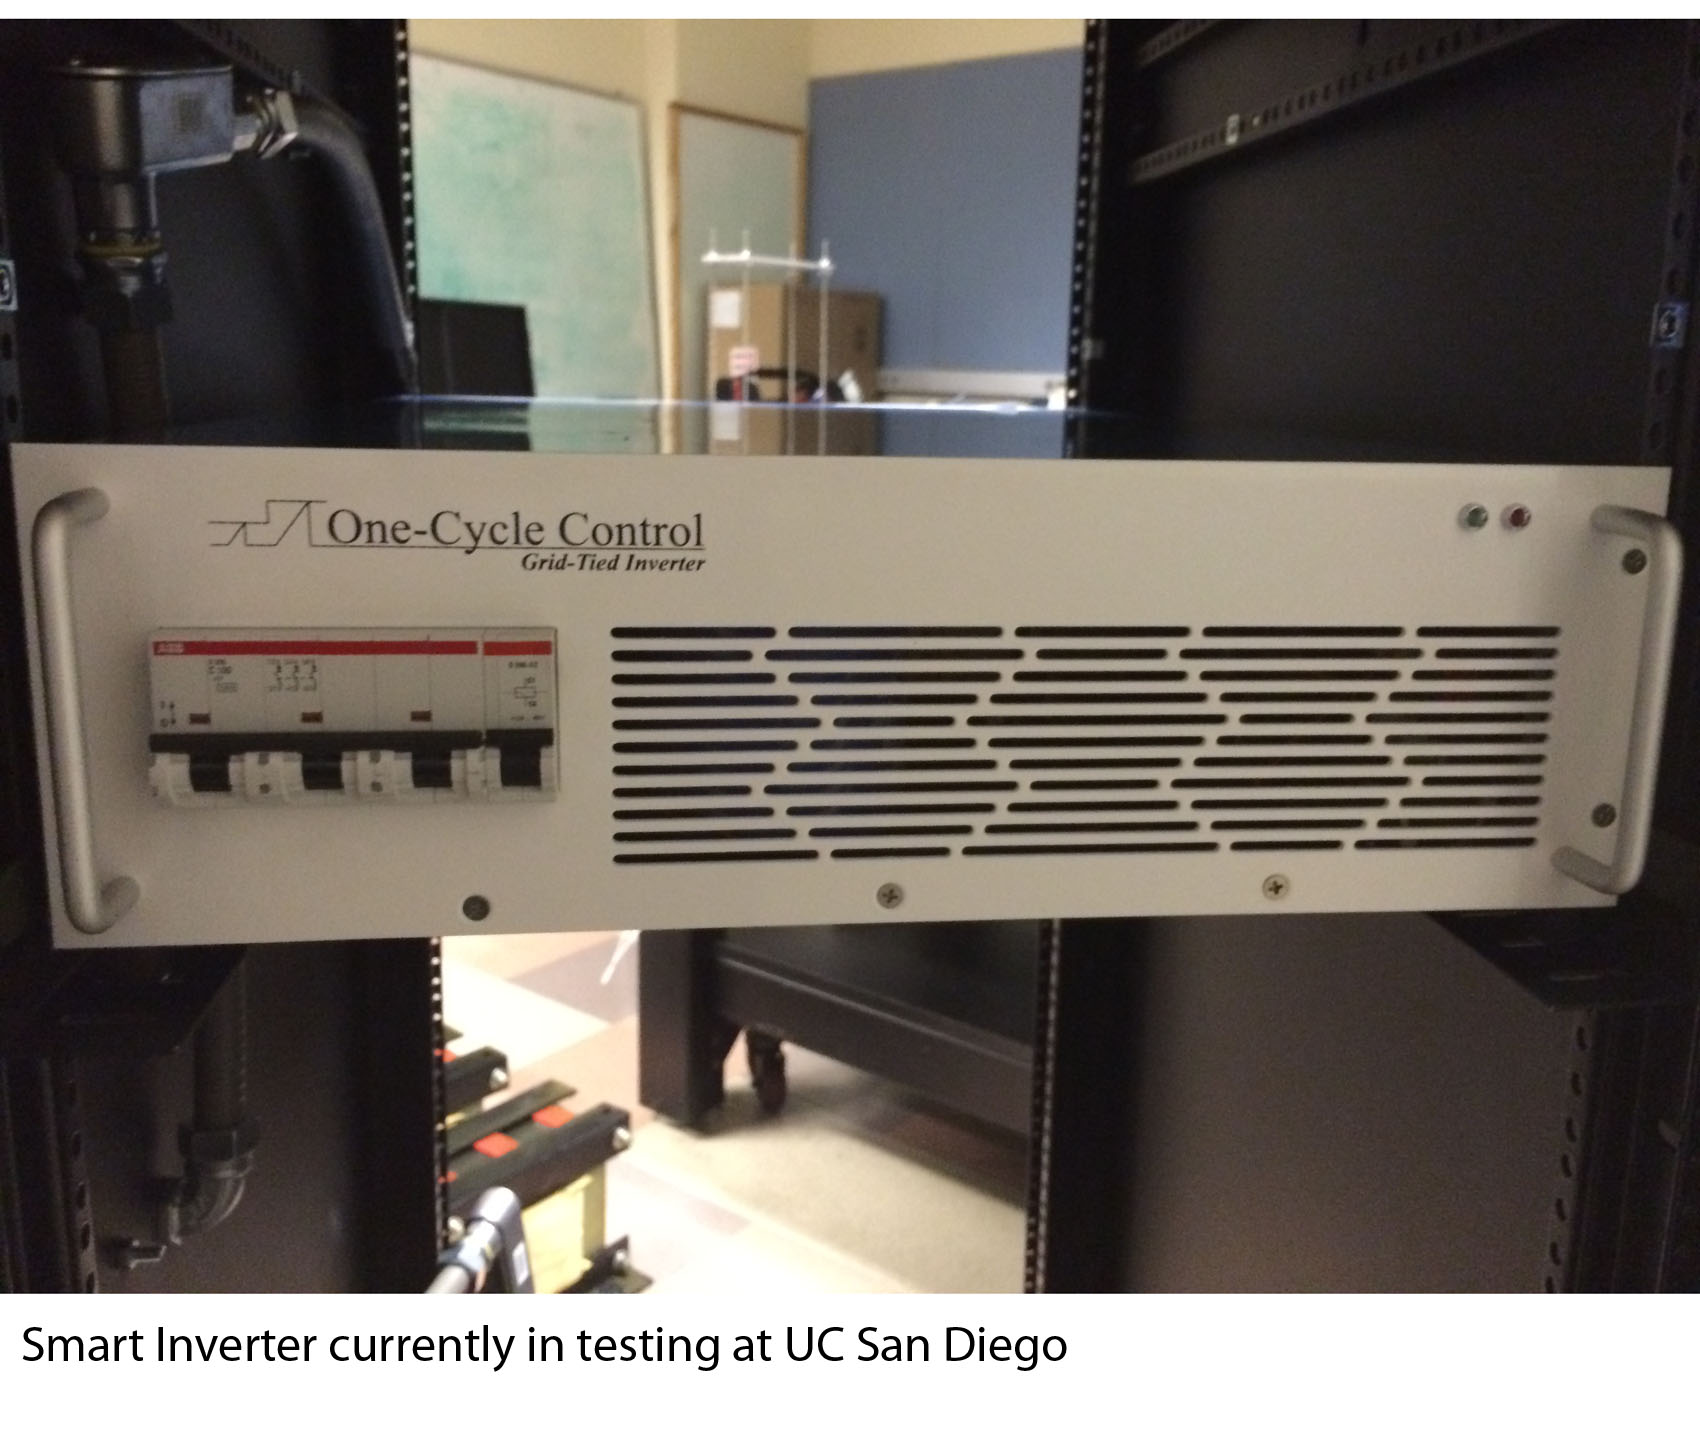 Smart inverter in use at experiments at UCSD